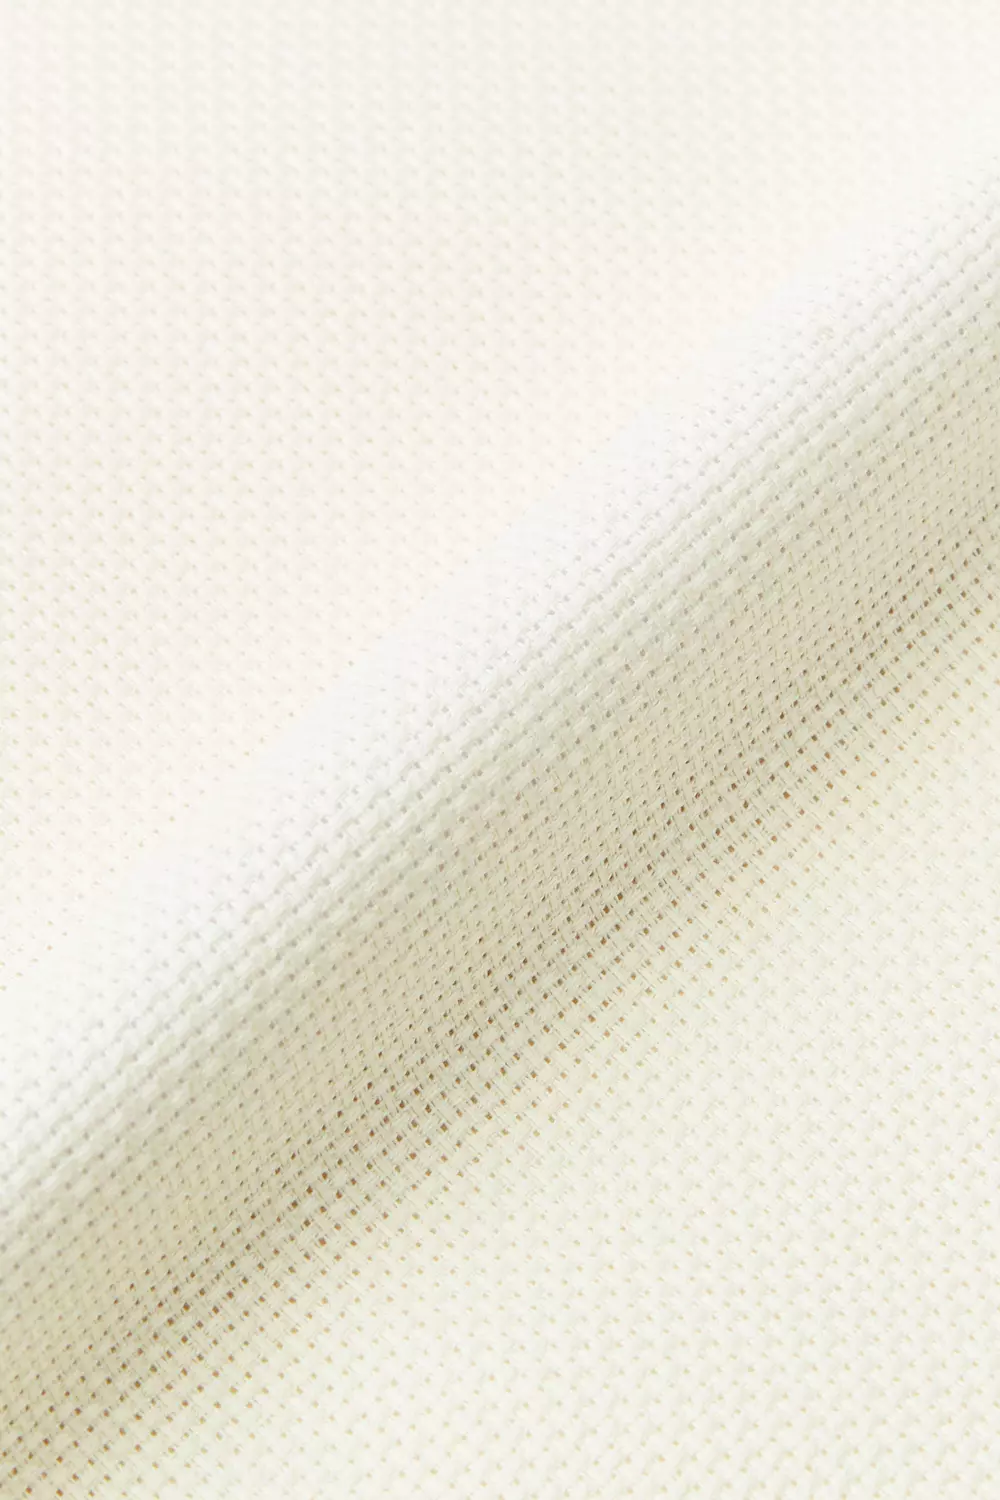 Ivory 14 Count Aida Cross Stitch Fabric, 1 Piece 16.5” X 14” With Trimmed  Edges